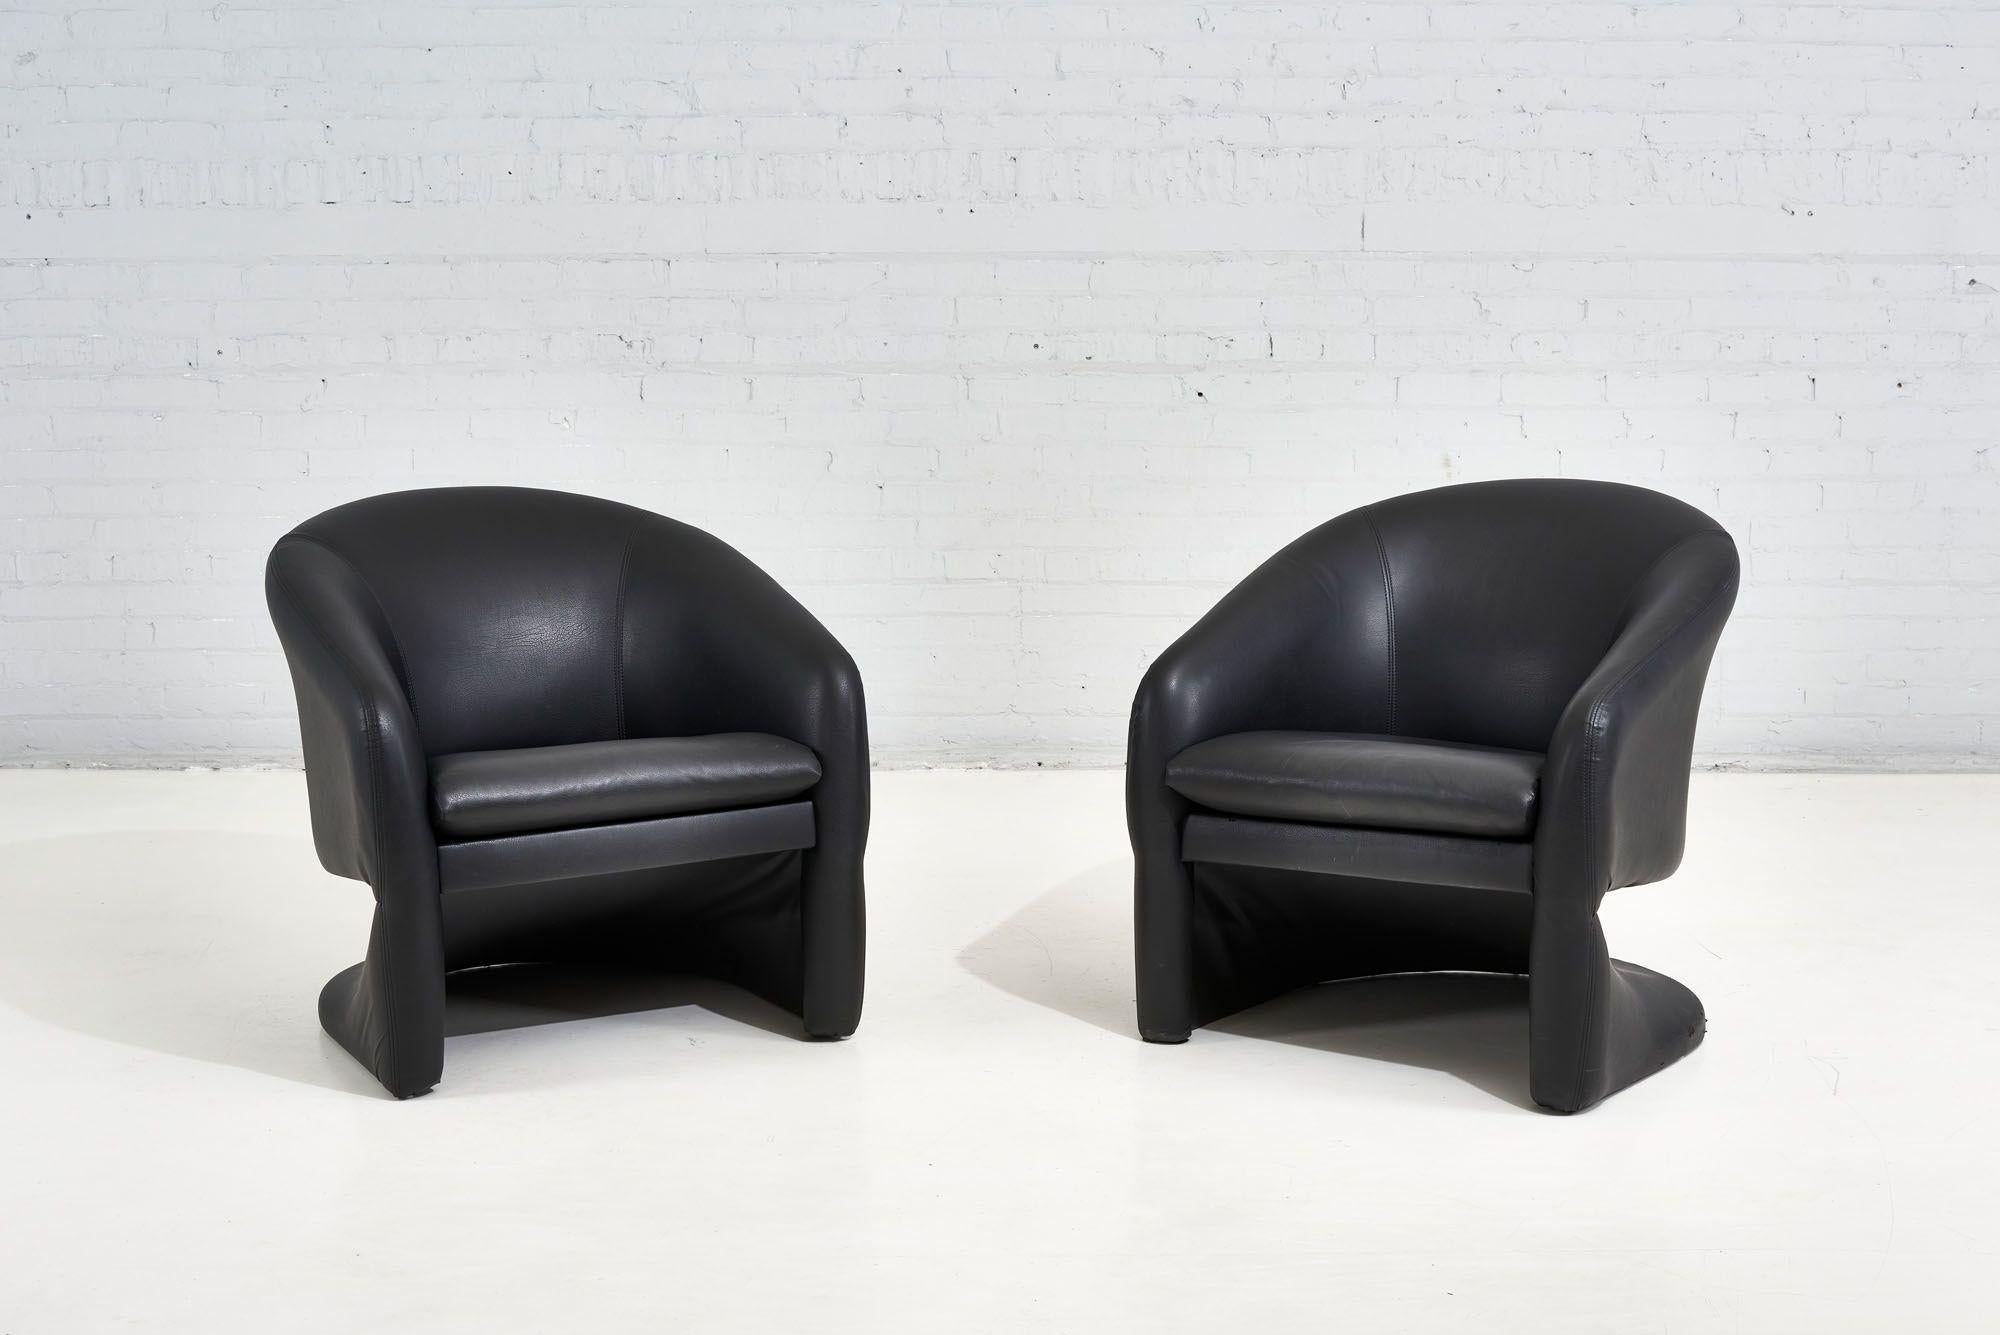 1970's Sculptural Postmodern Lounge Chairs. Original black vinyl upholstery and in very good condition.